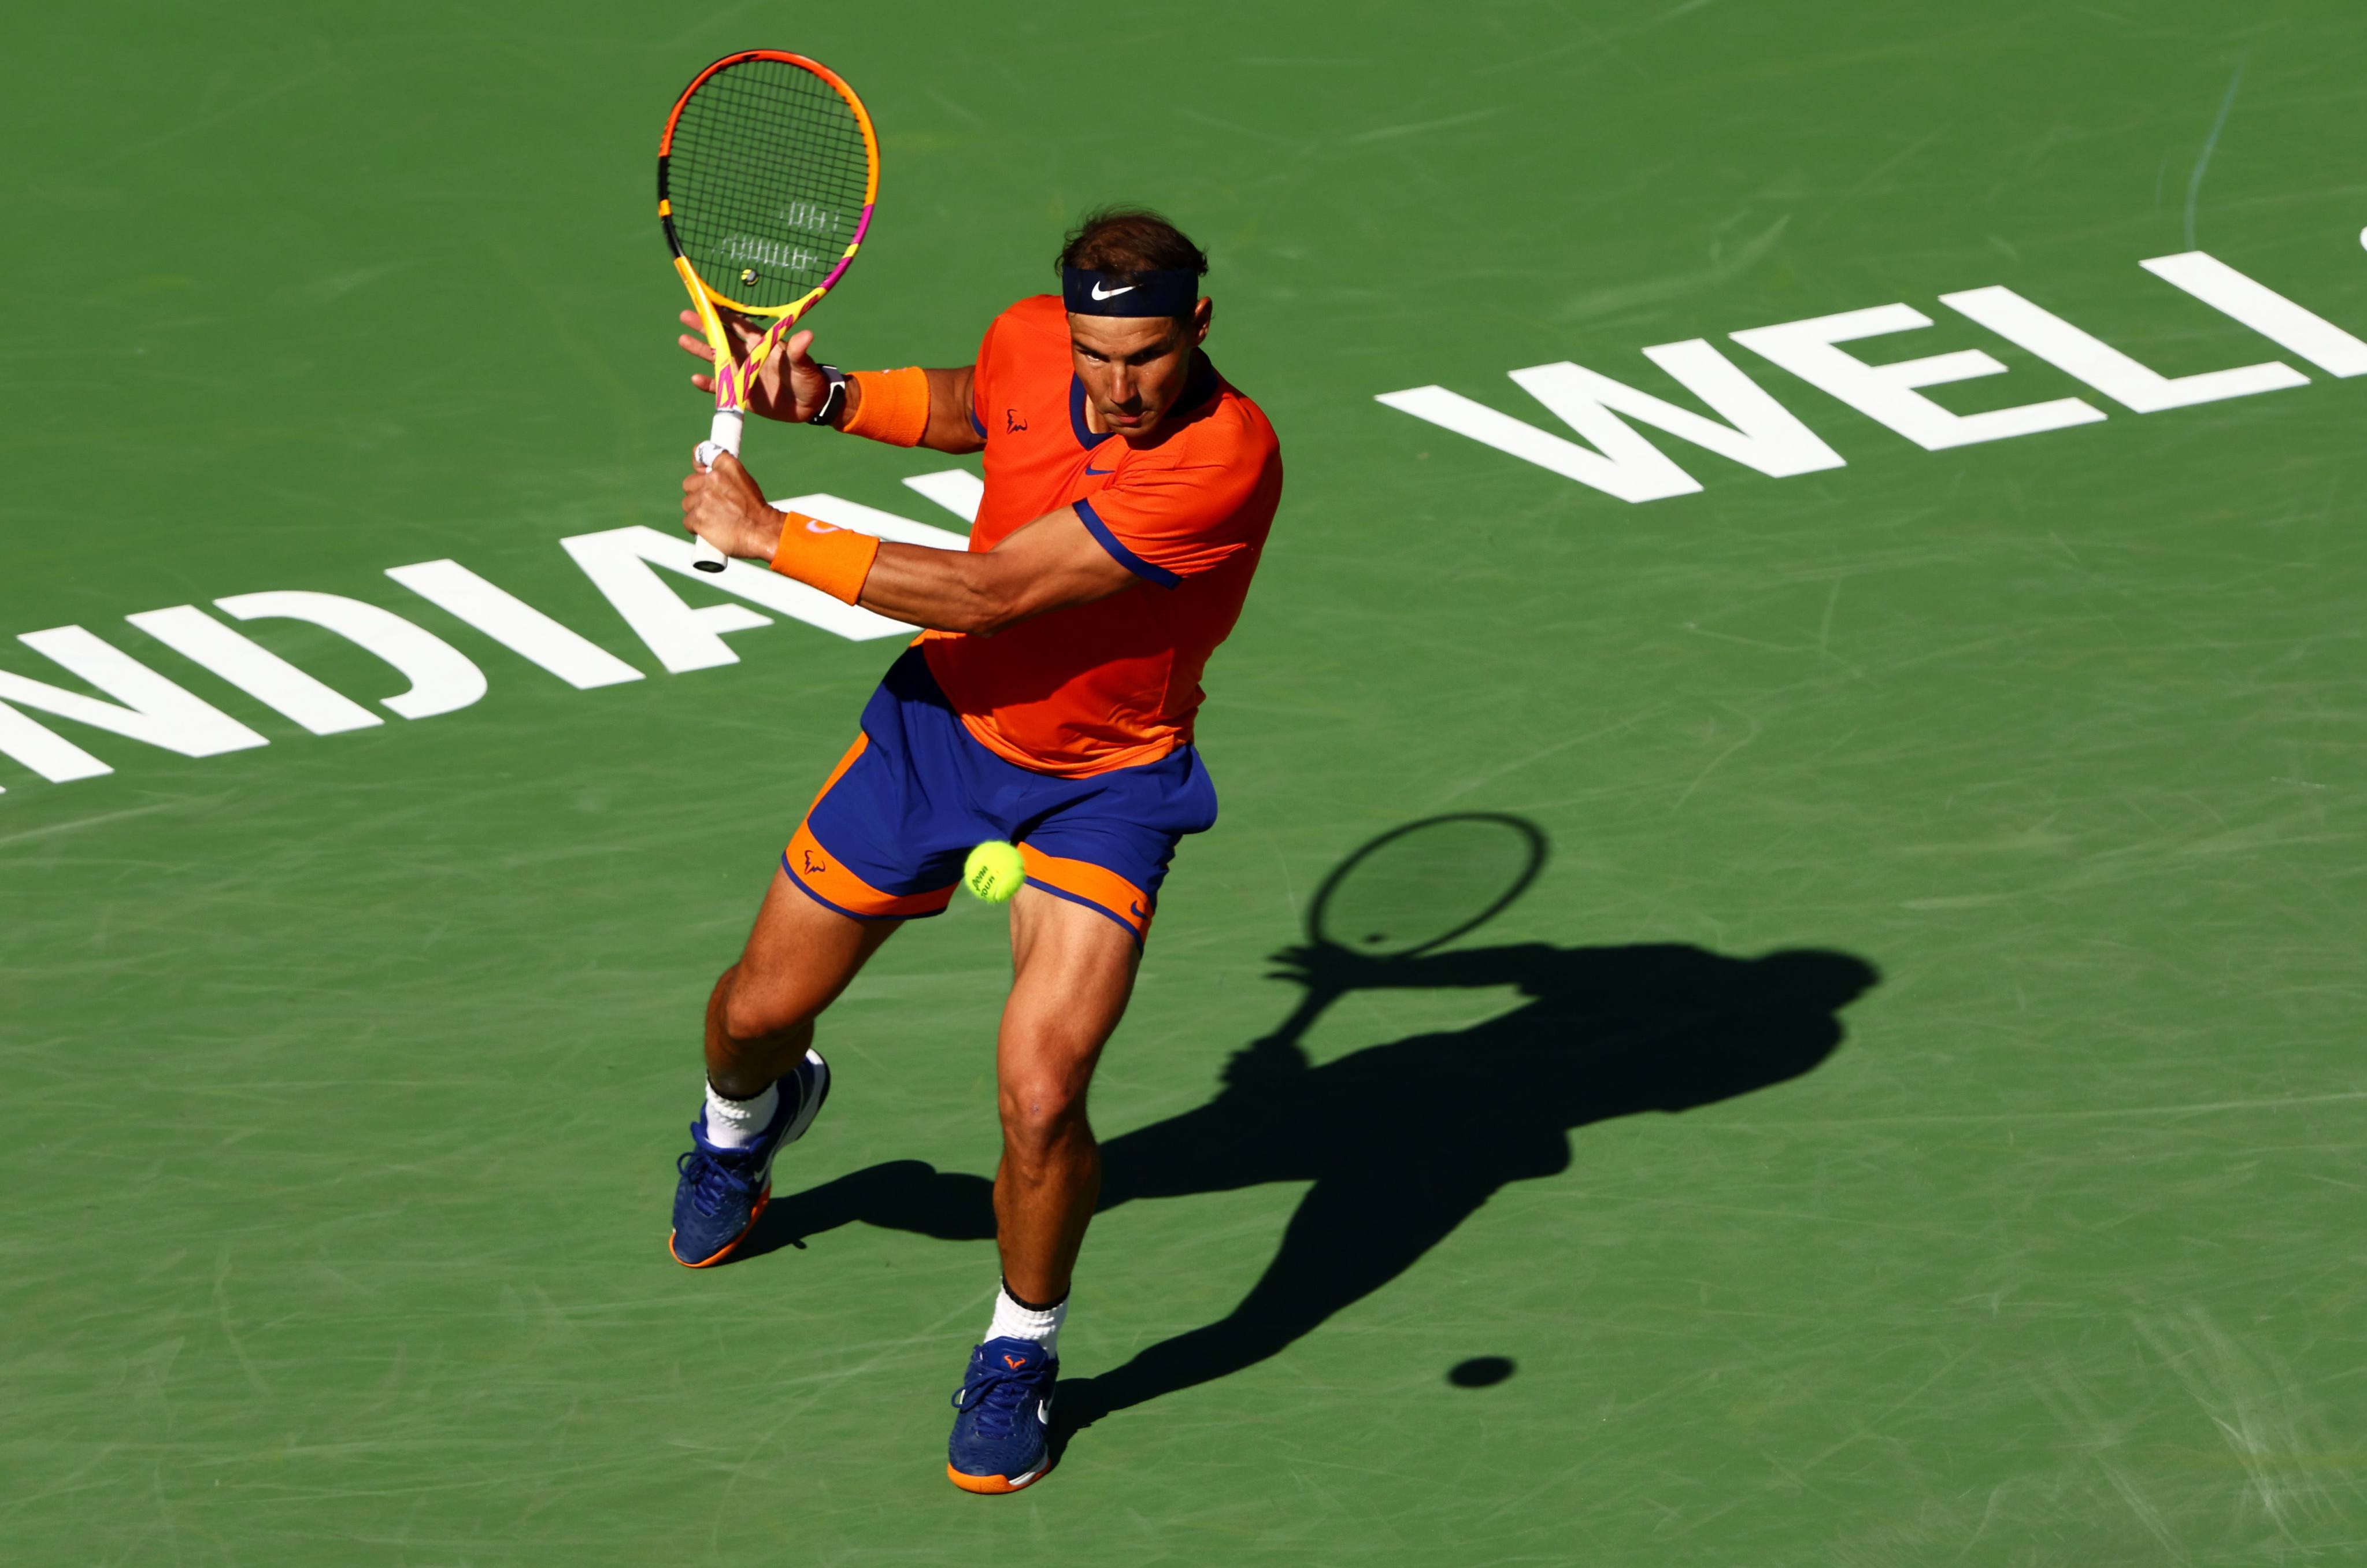 Obsessie gastvrouw Wiens Rafael Nadal beats a fired up Nick Kyrgios in explosive Indian Wells  quarter-final match, goes to 19-0 | South China Morning Post